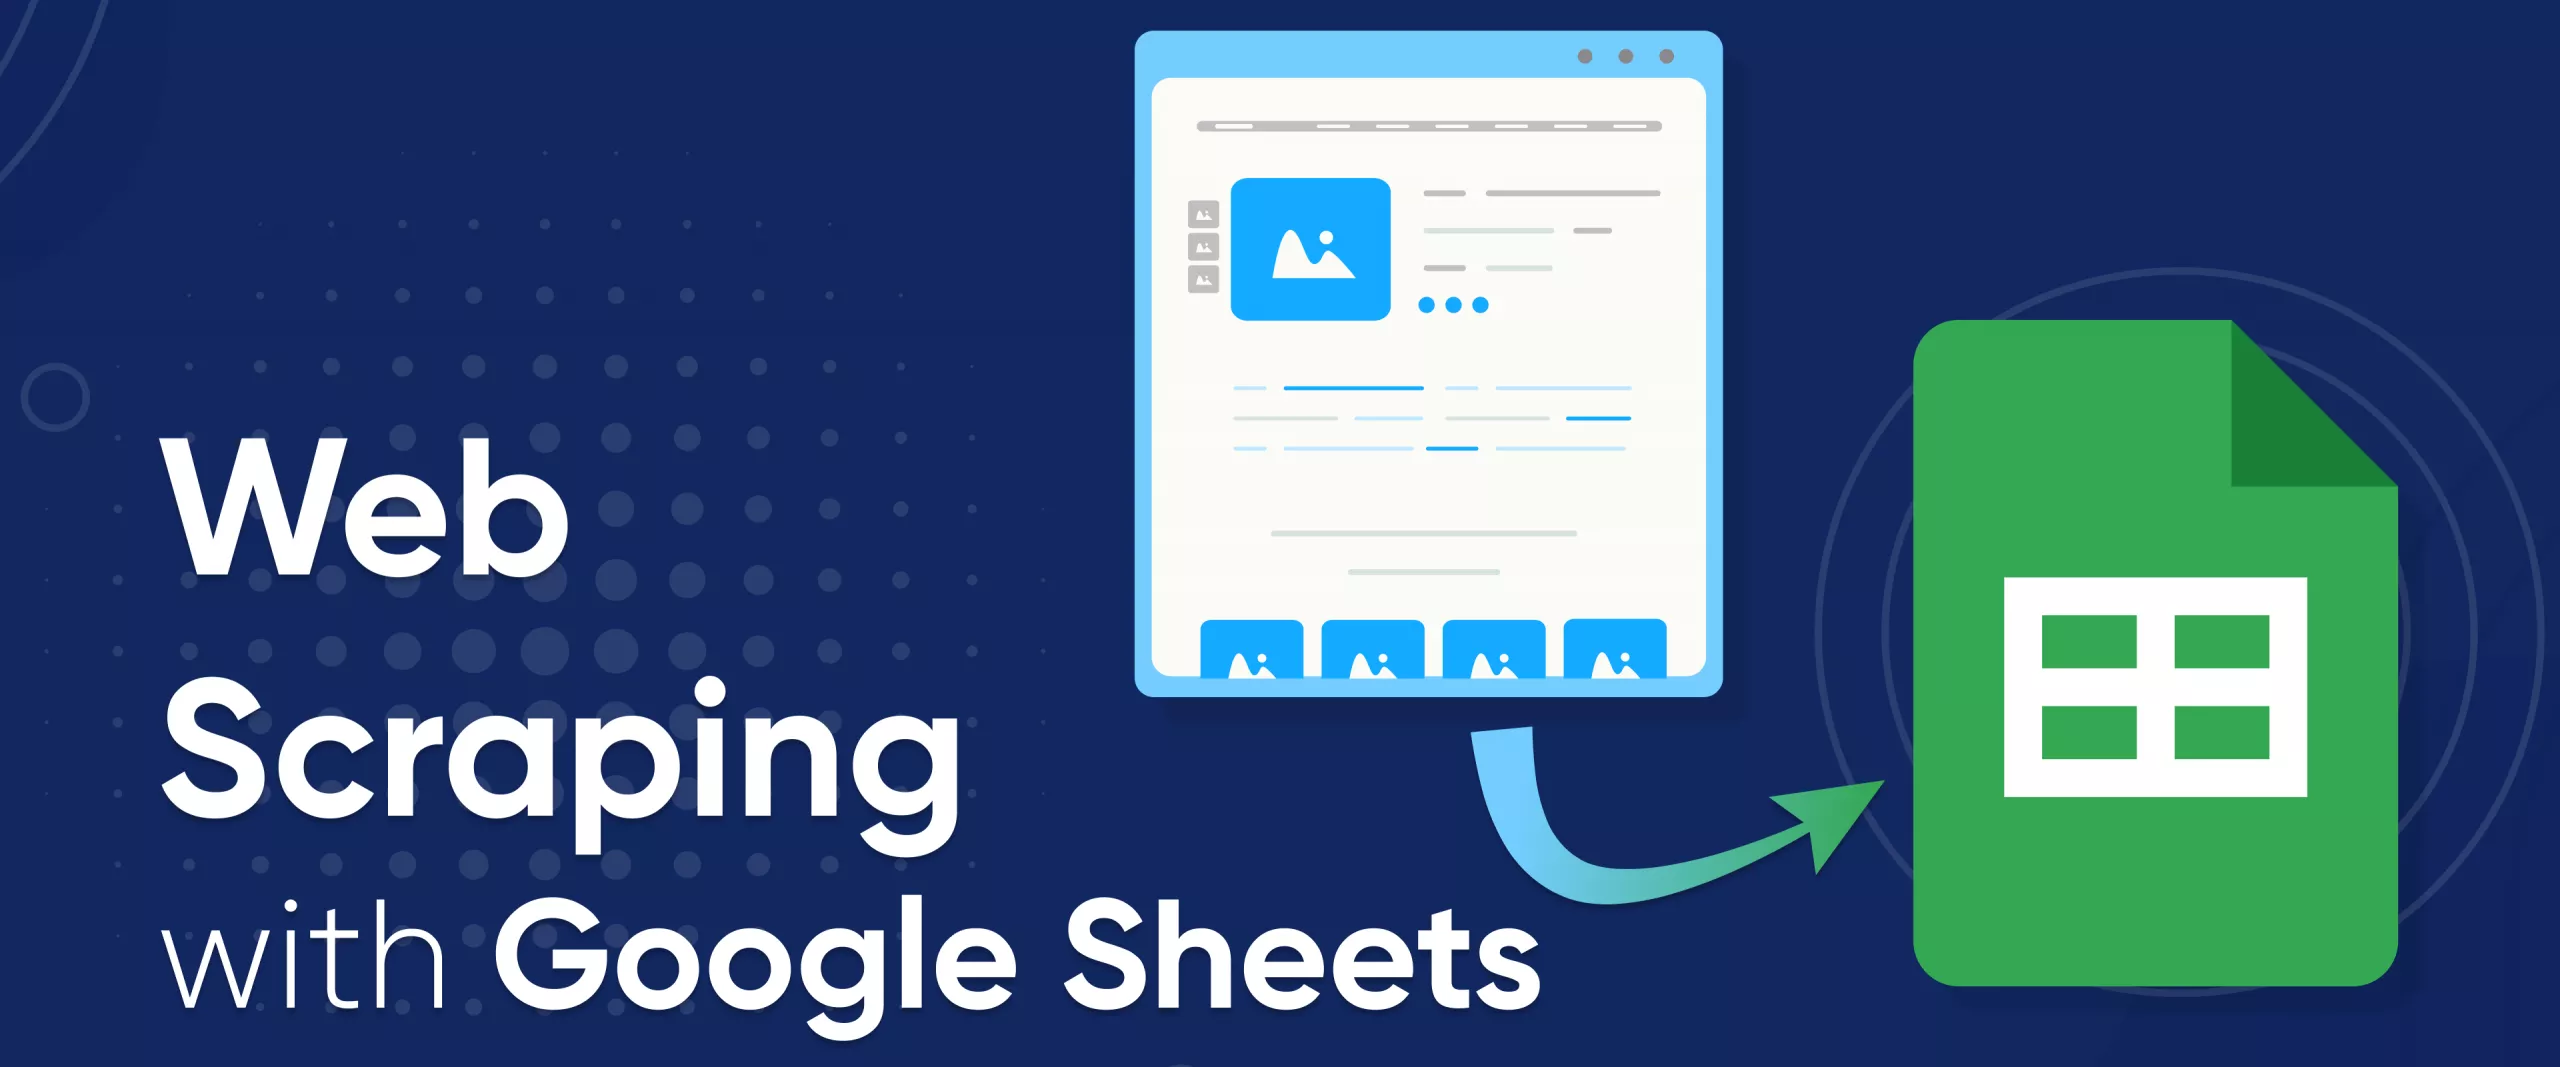 Google Sheets Web Scraping: A Simple Guide